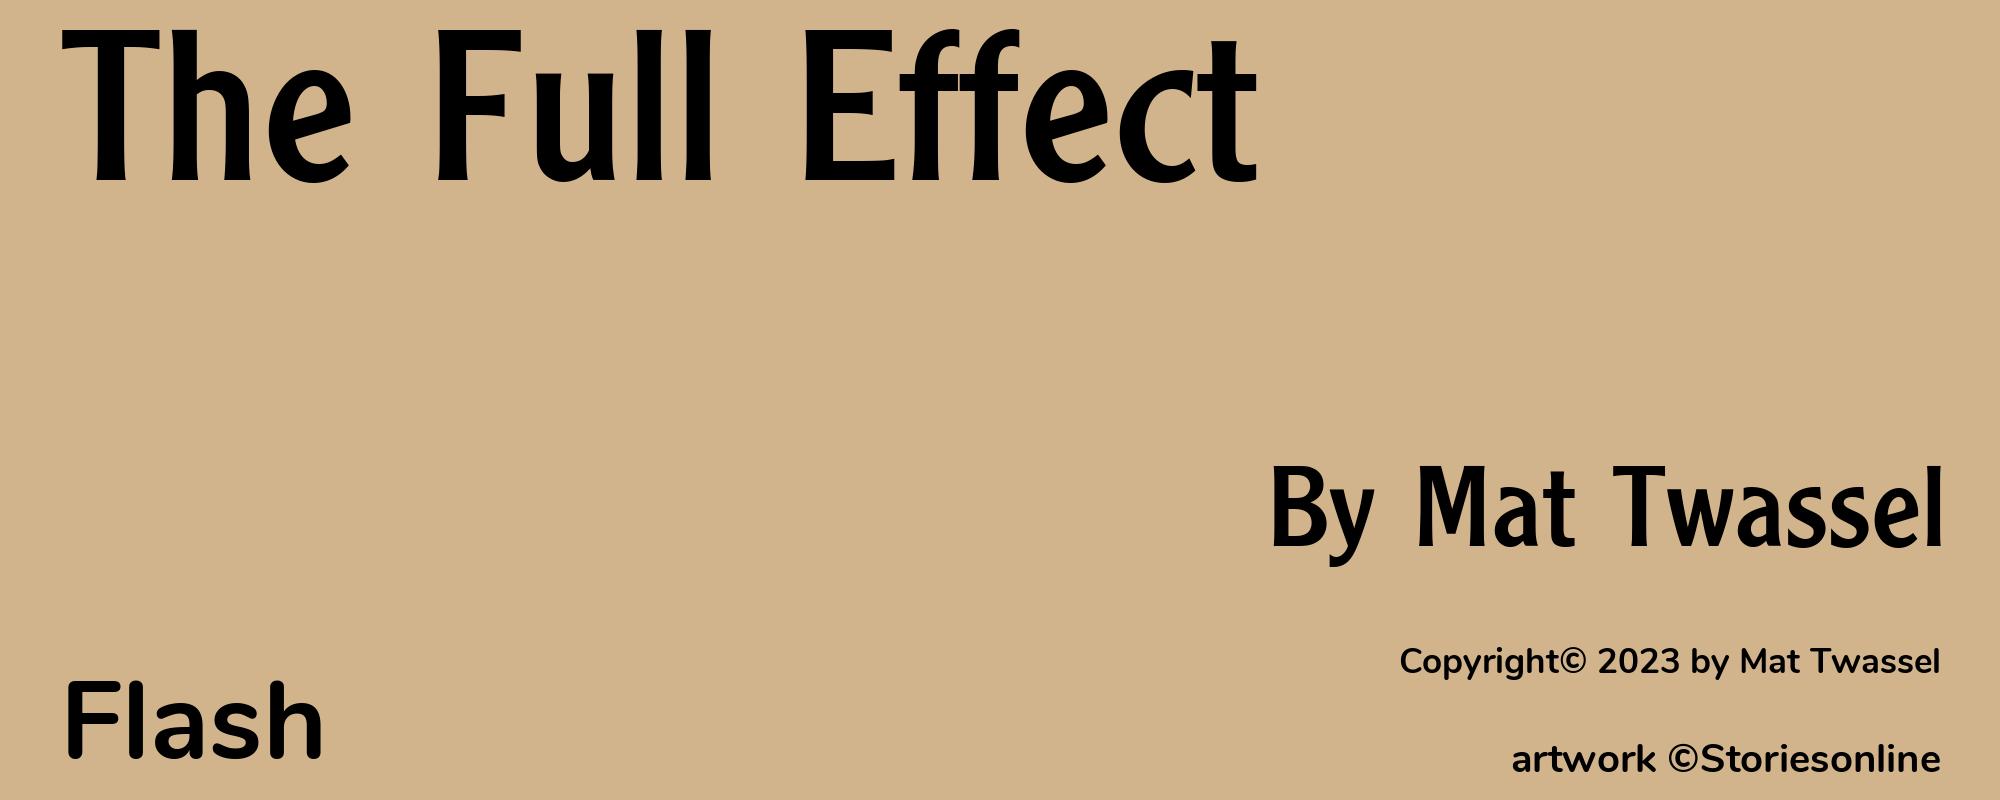 The Full Effect - Cover